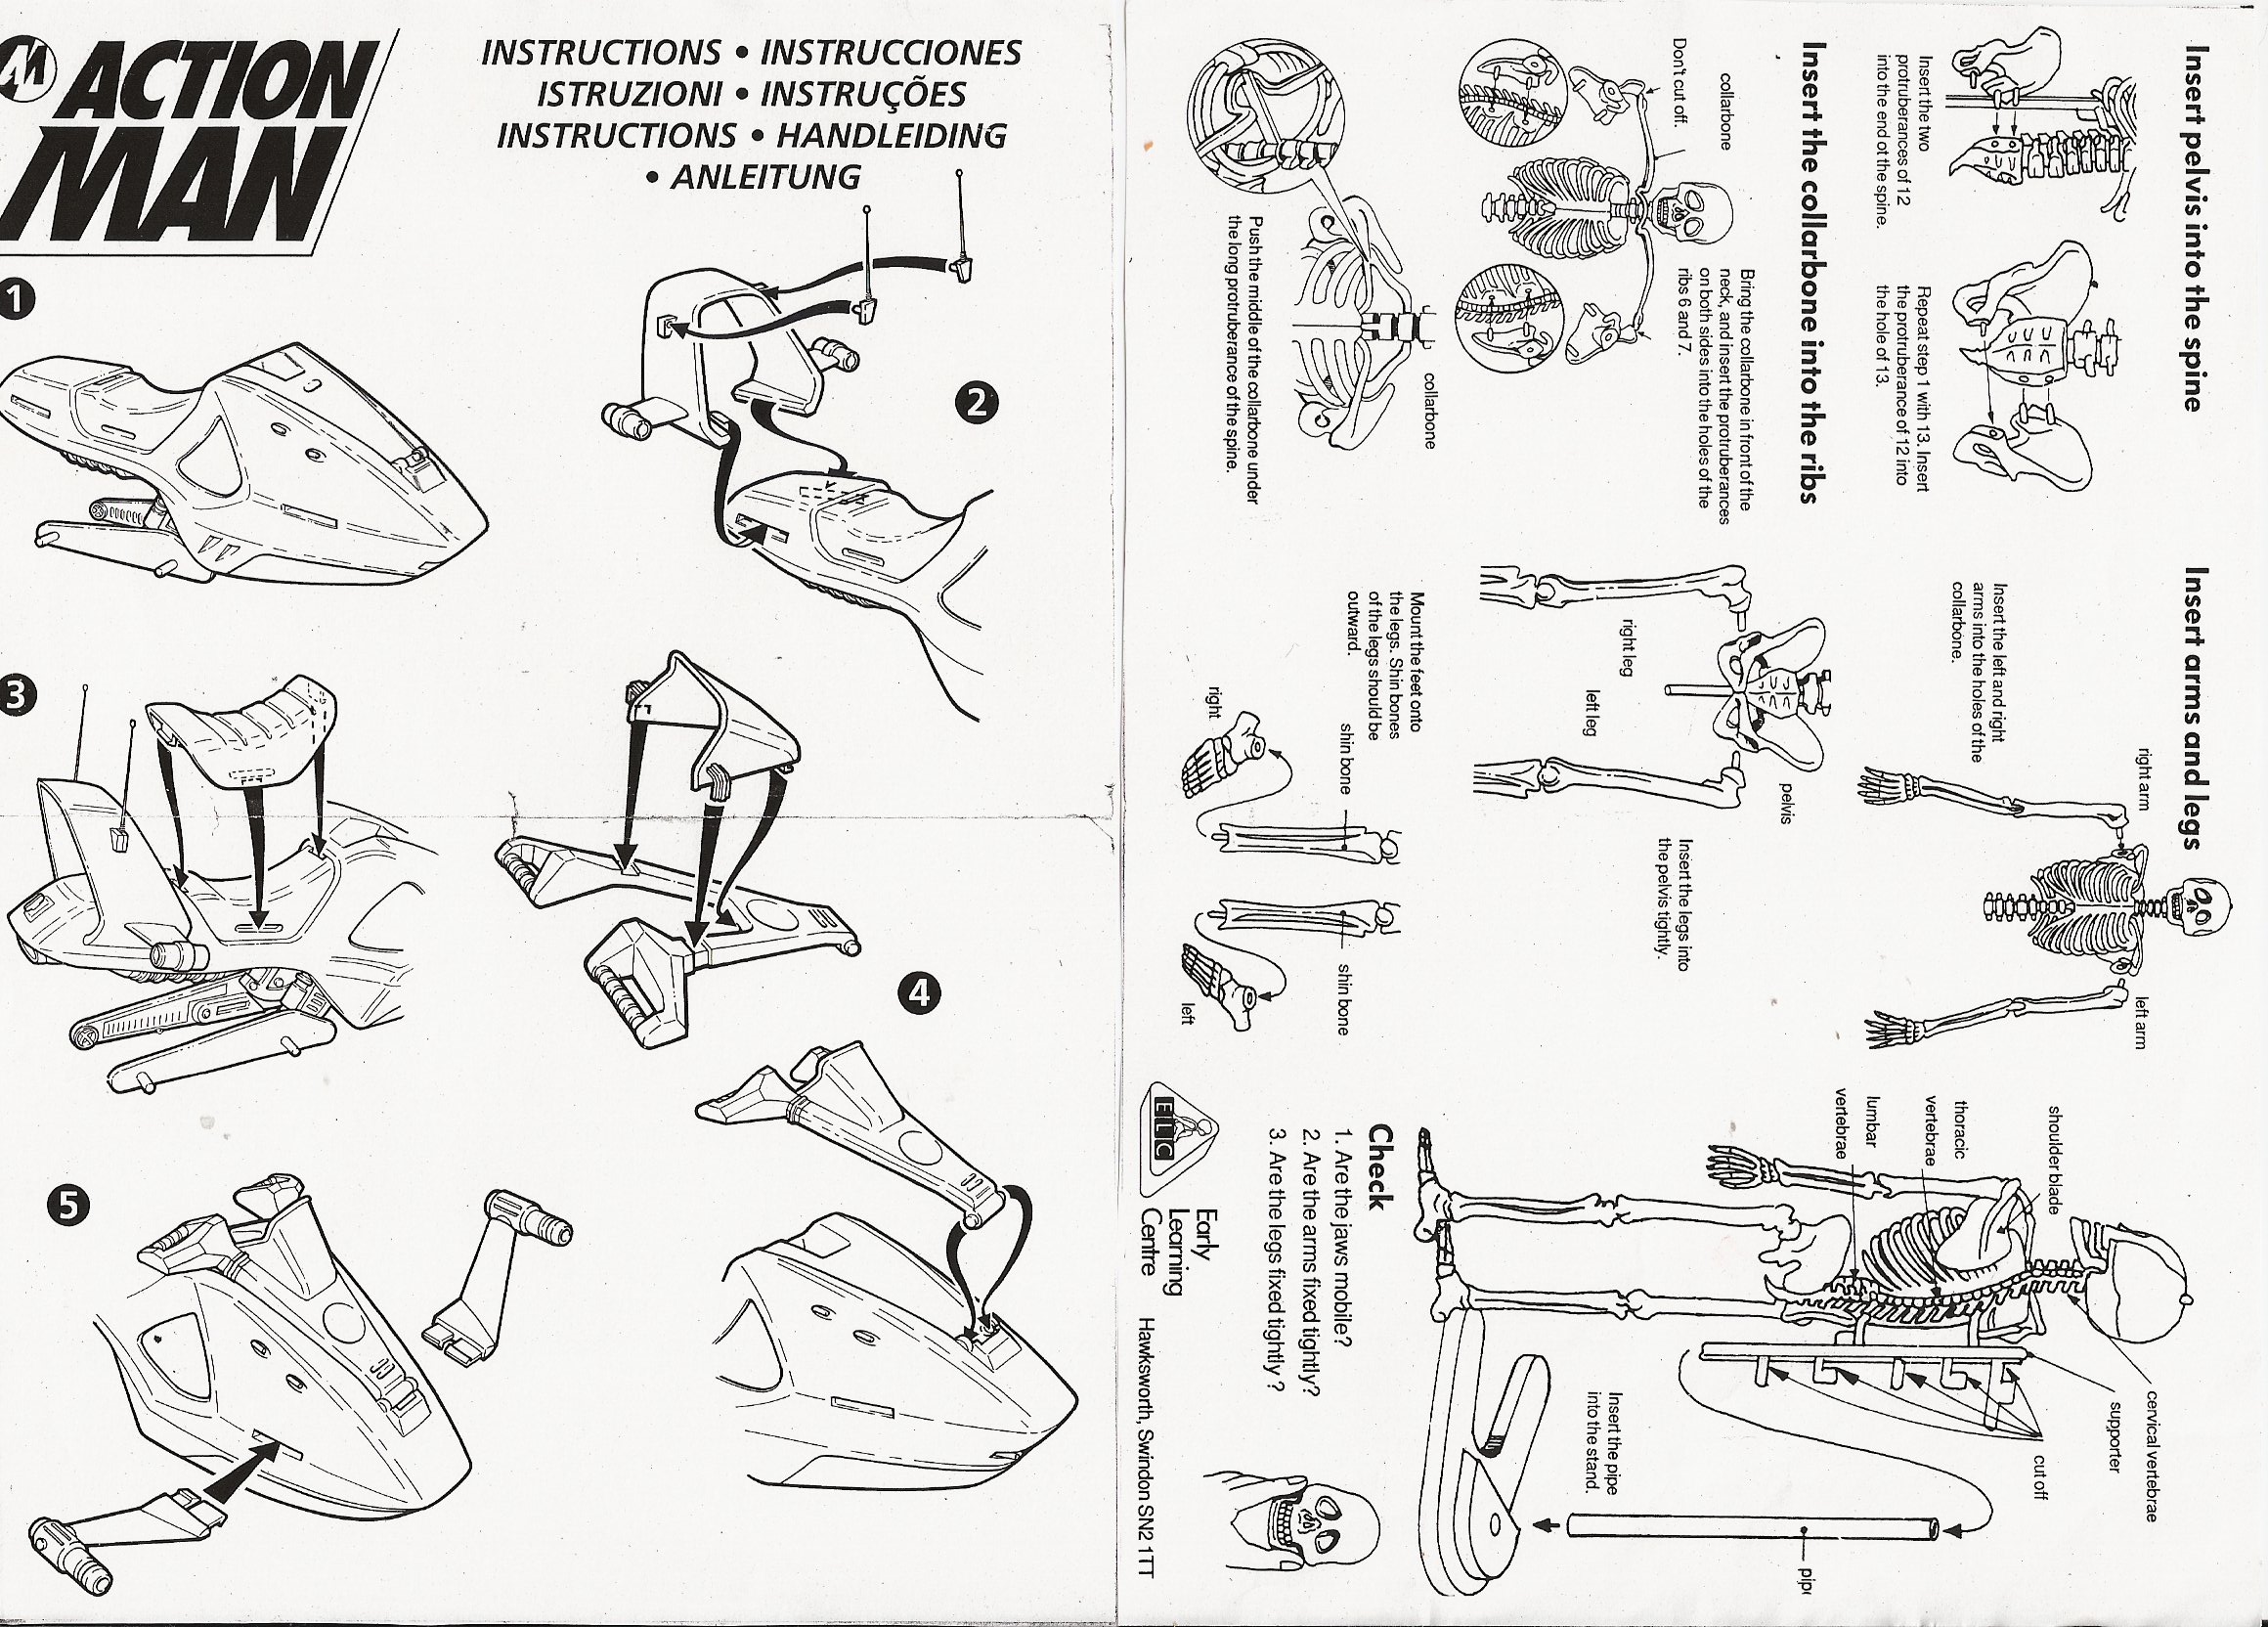 Junk Drawer Item - toy manuals - 1 Insert pelvis into the spine Insert arms and legs 192 al shoulder Se Wien 12 Top th 13 Insert the collarbone into the ribs Bringtection into the dinhe proberim Dories bathing th Mbart the foarte telesne orde Bu si More 4